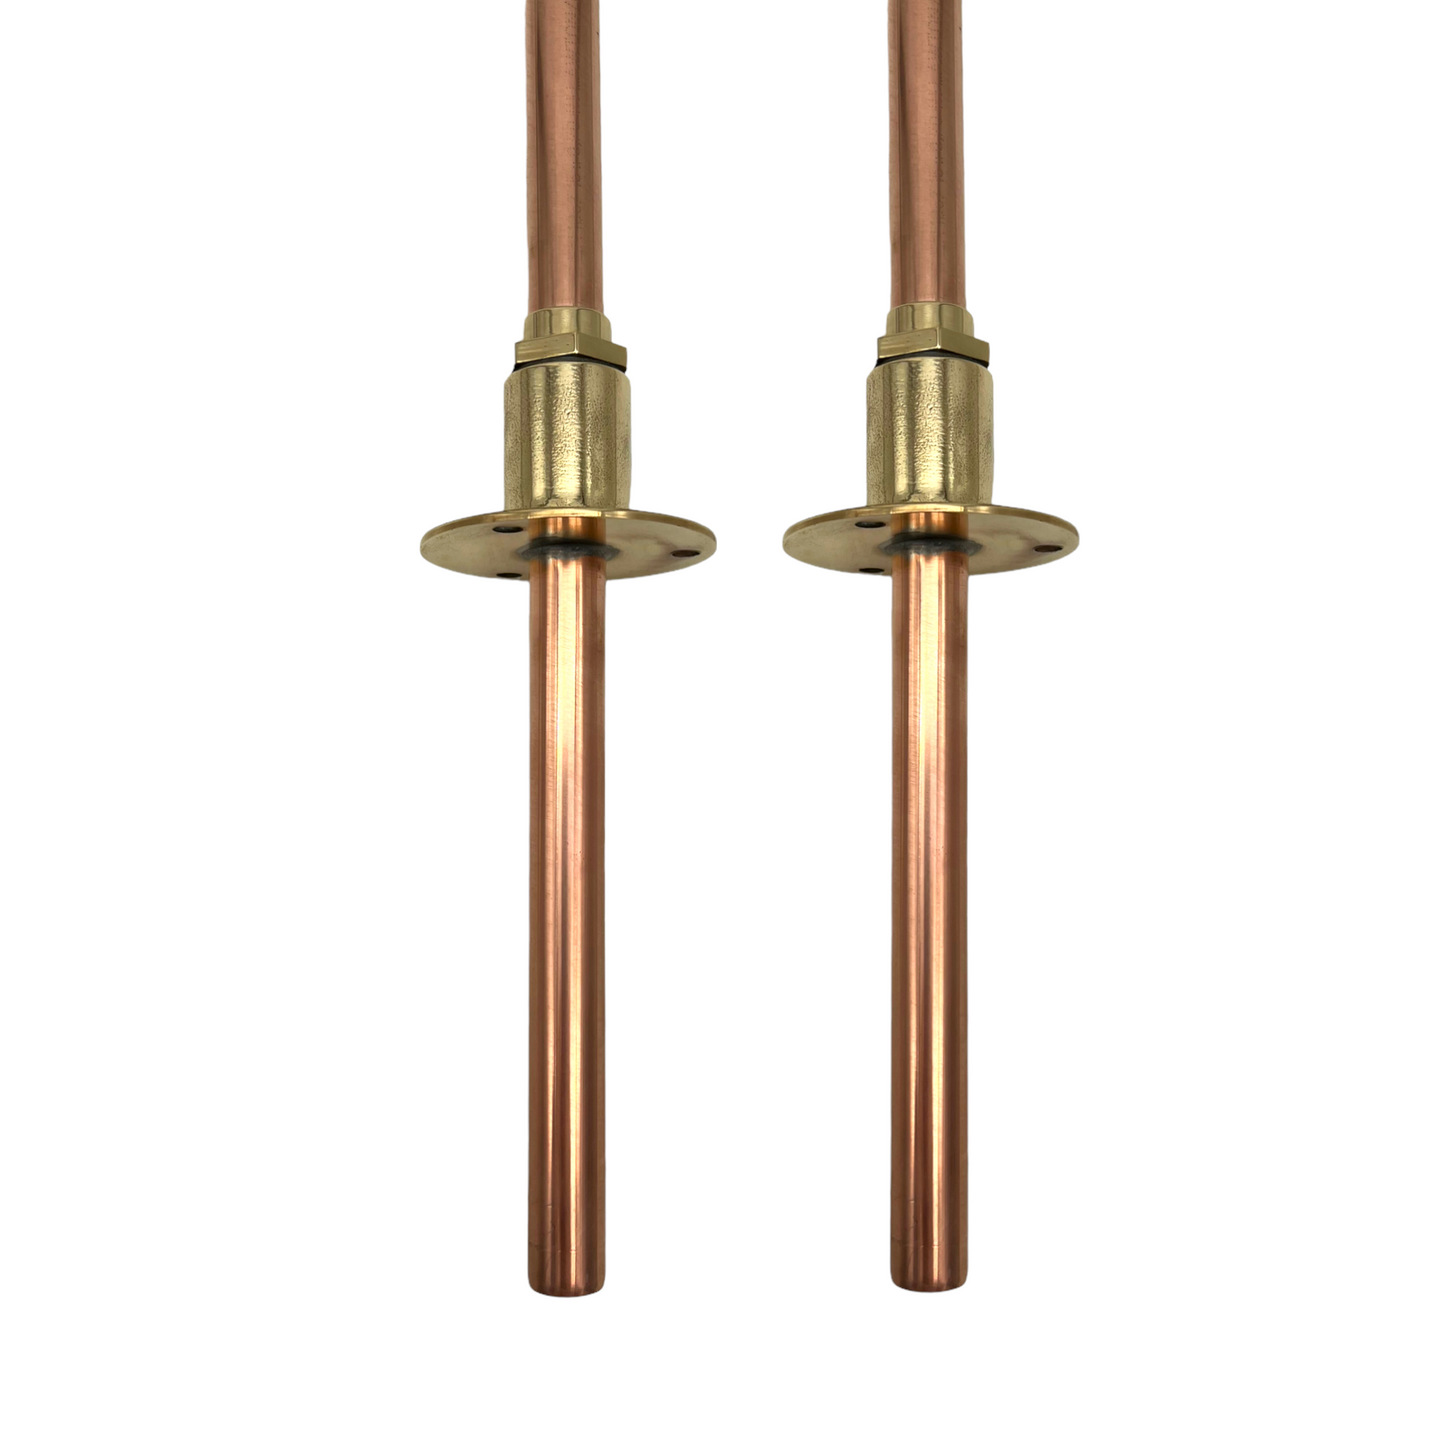 Tail ends of copper and brass taps sold by All Things French Store